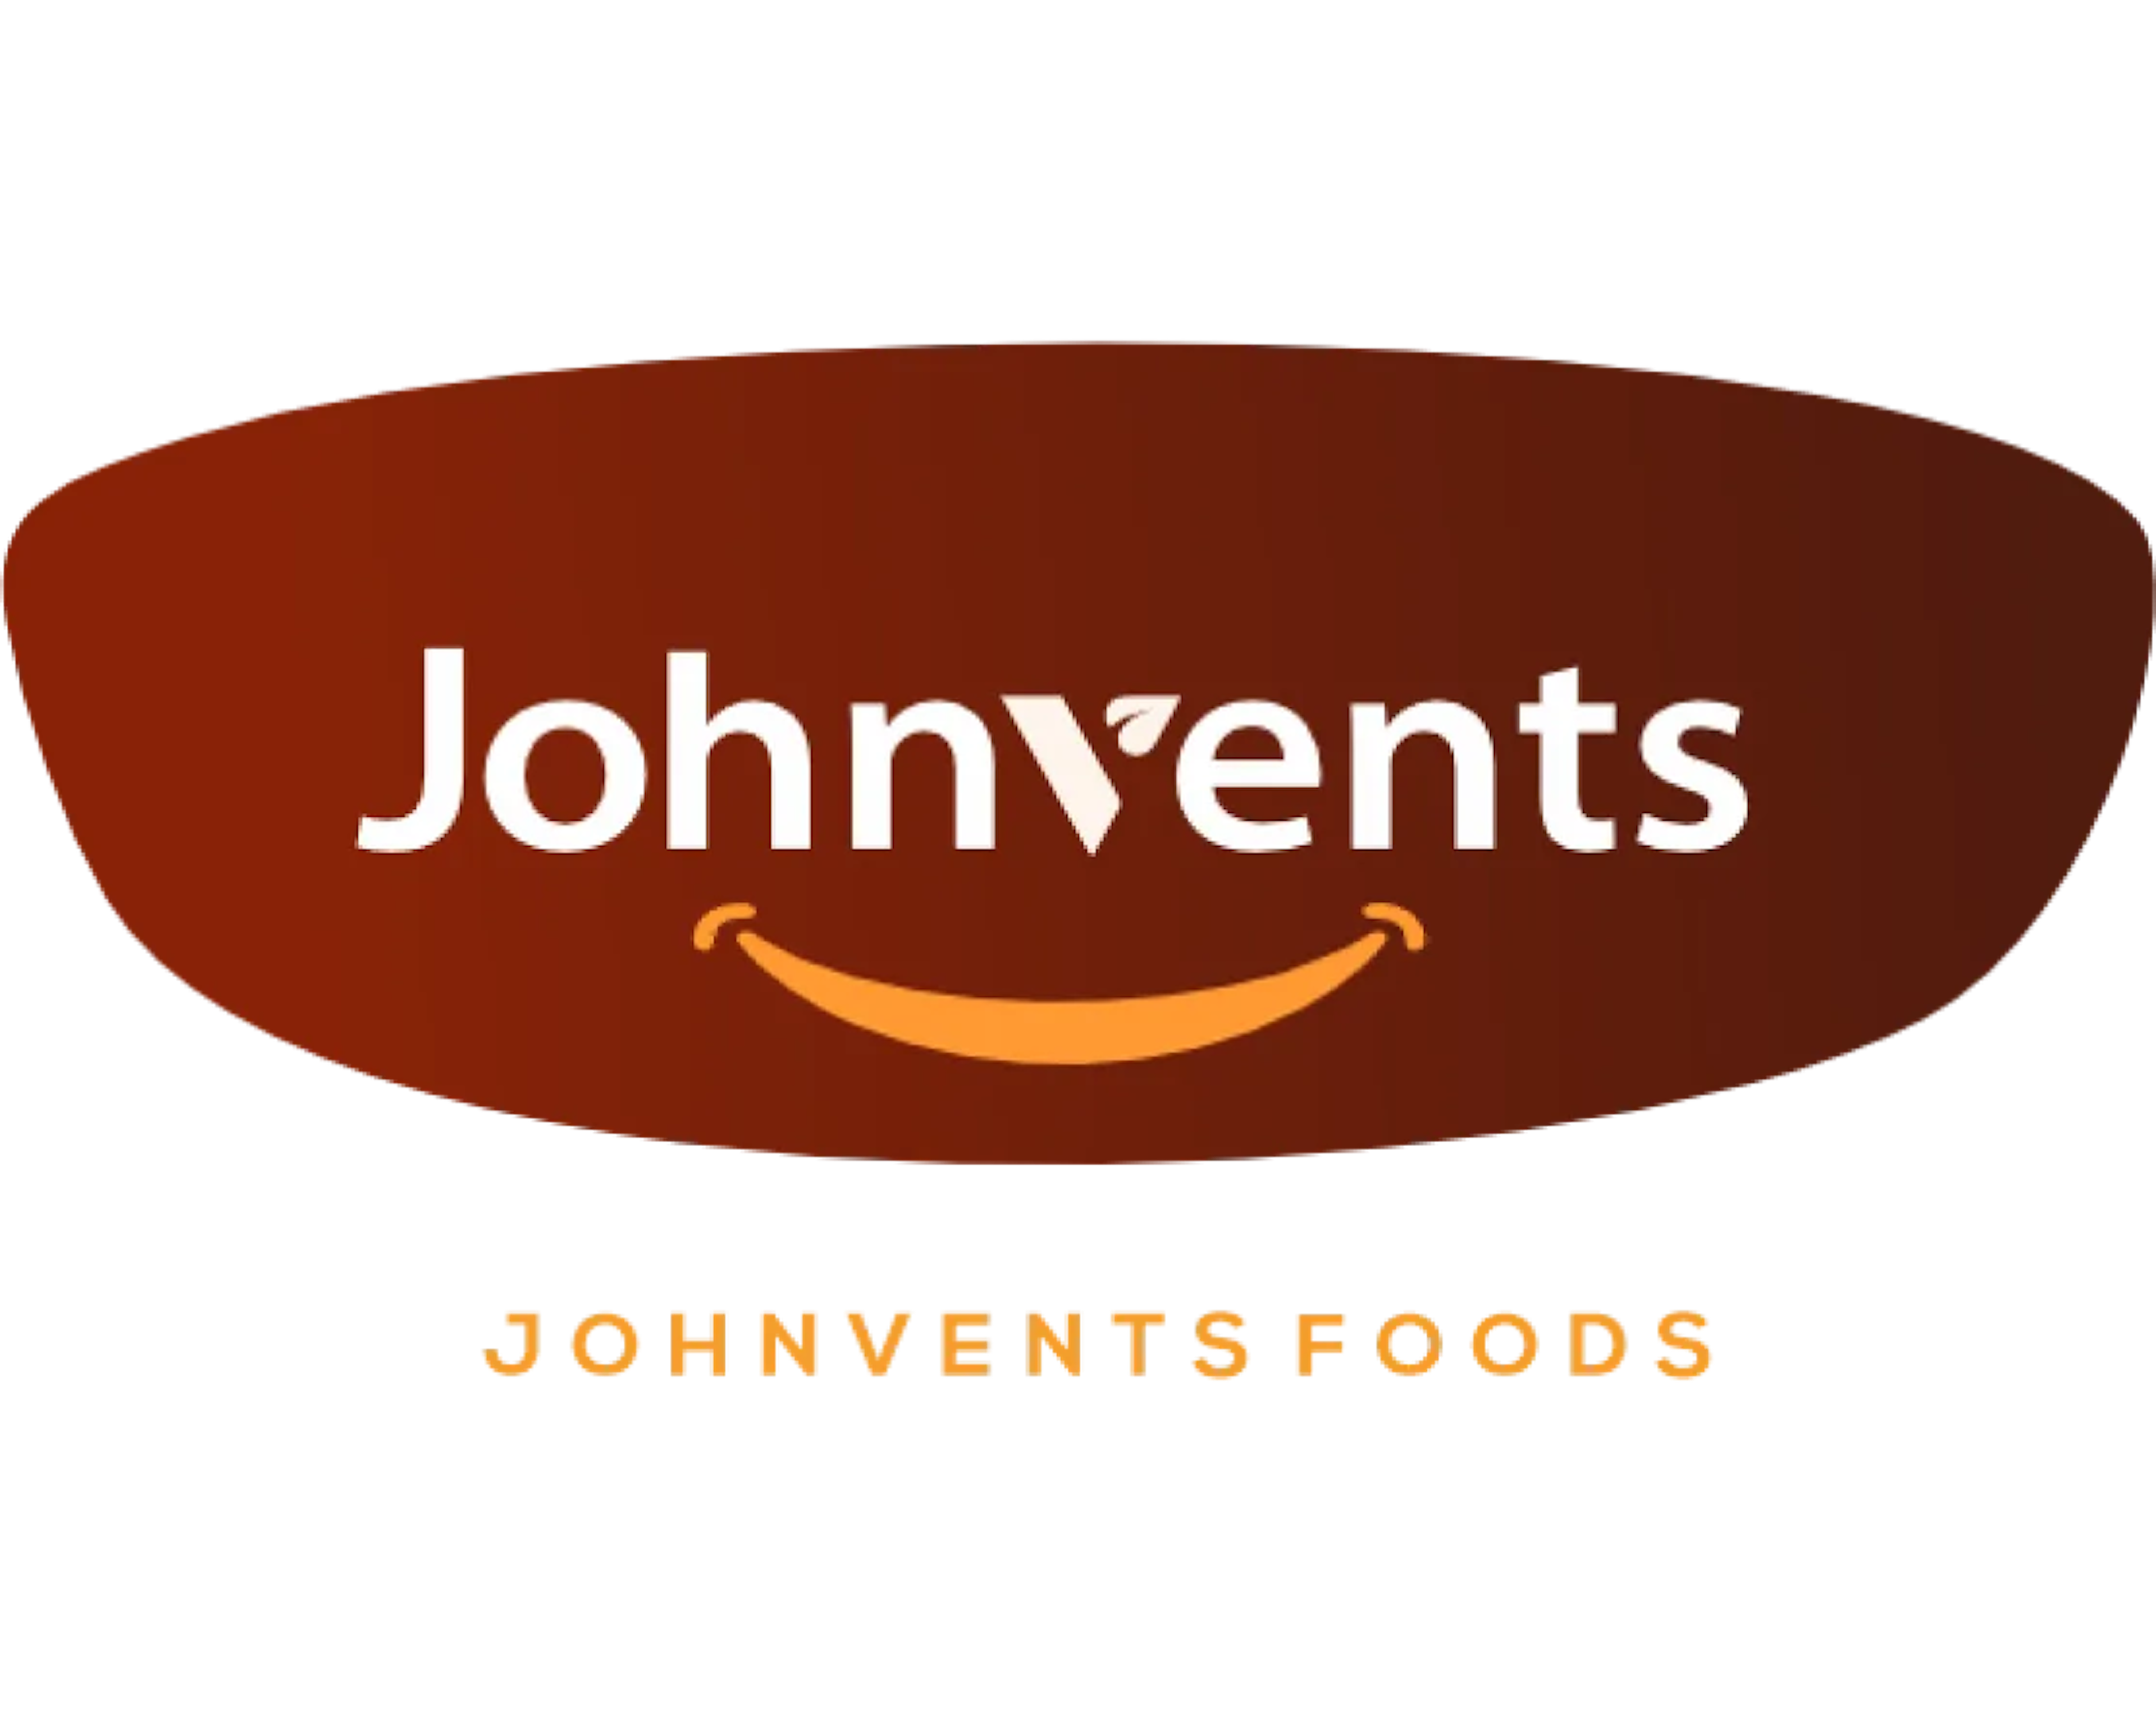 Johnvents Foods